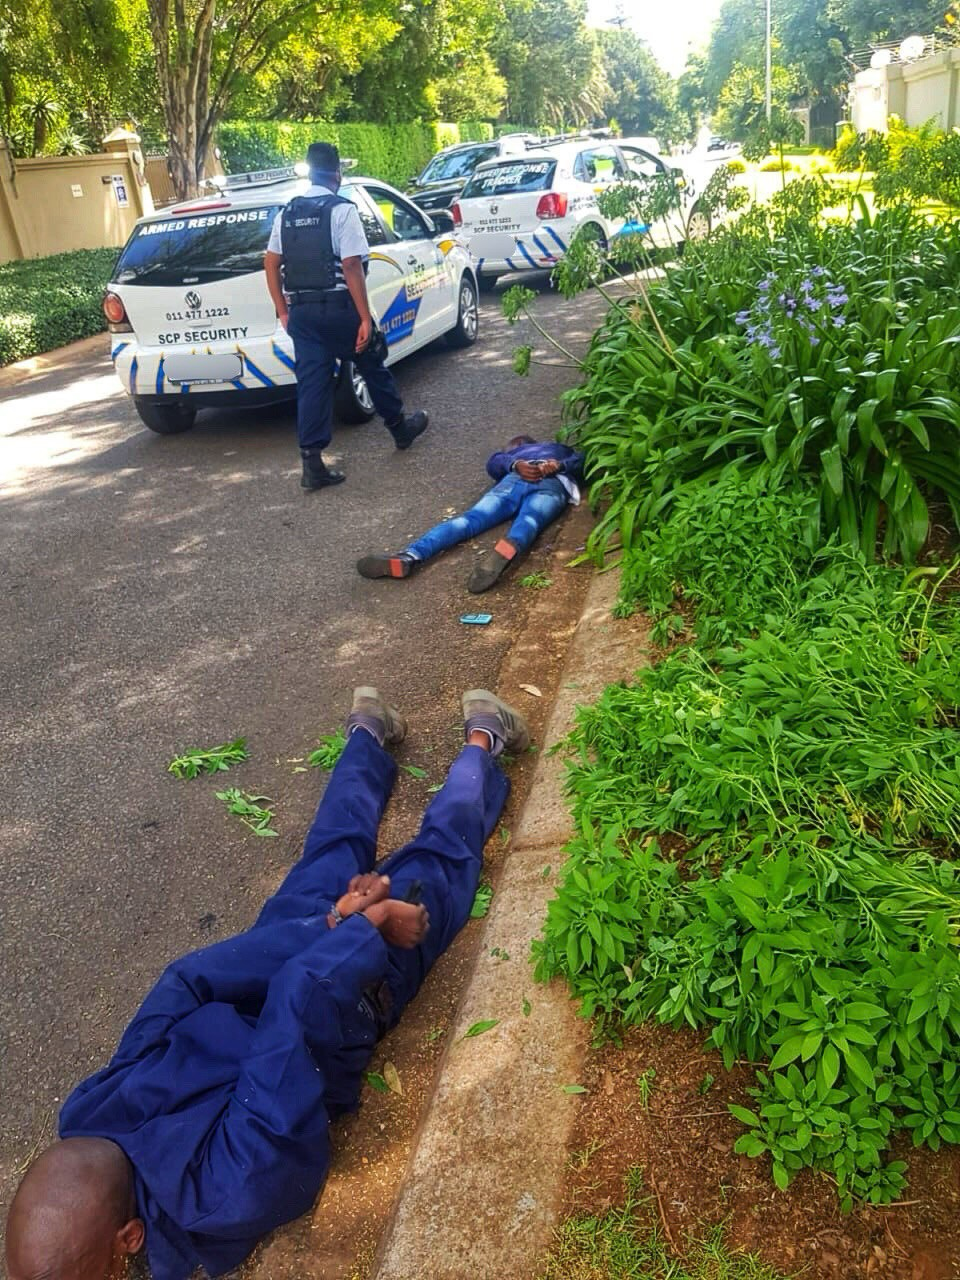 Two suspects arrested after they attempted an armed robbery in Fairland